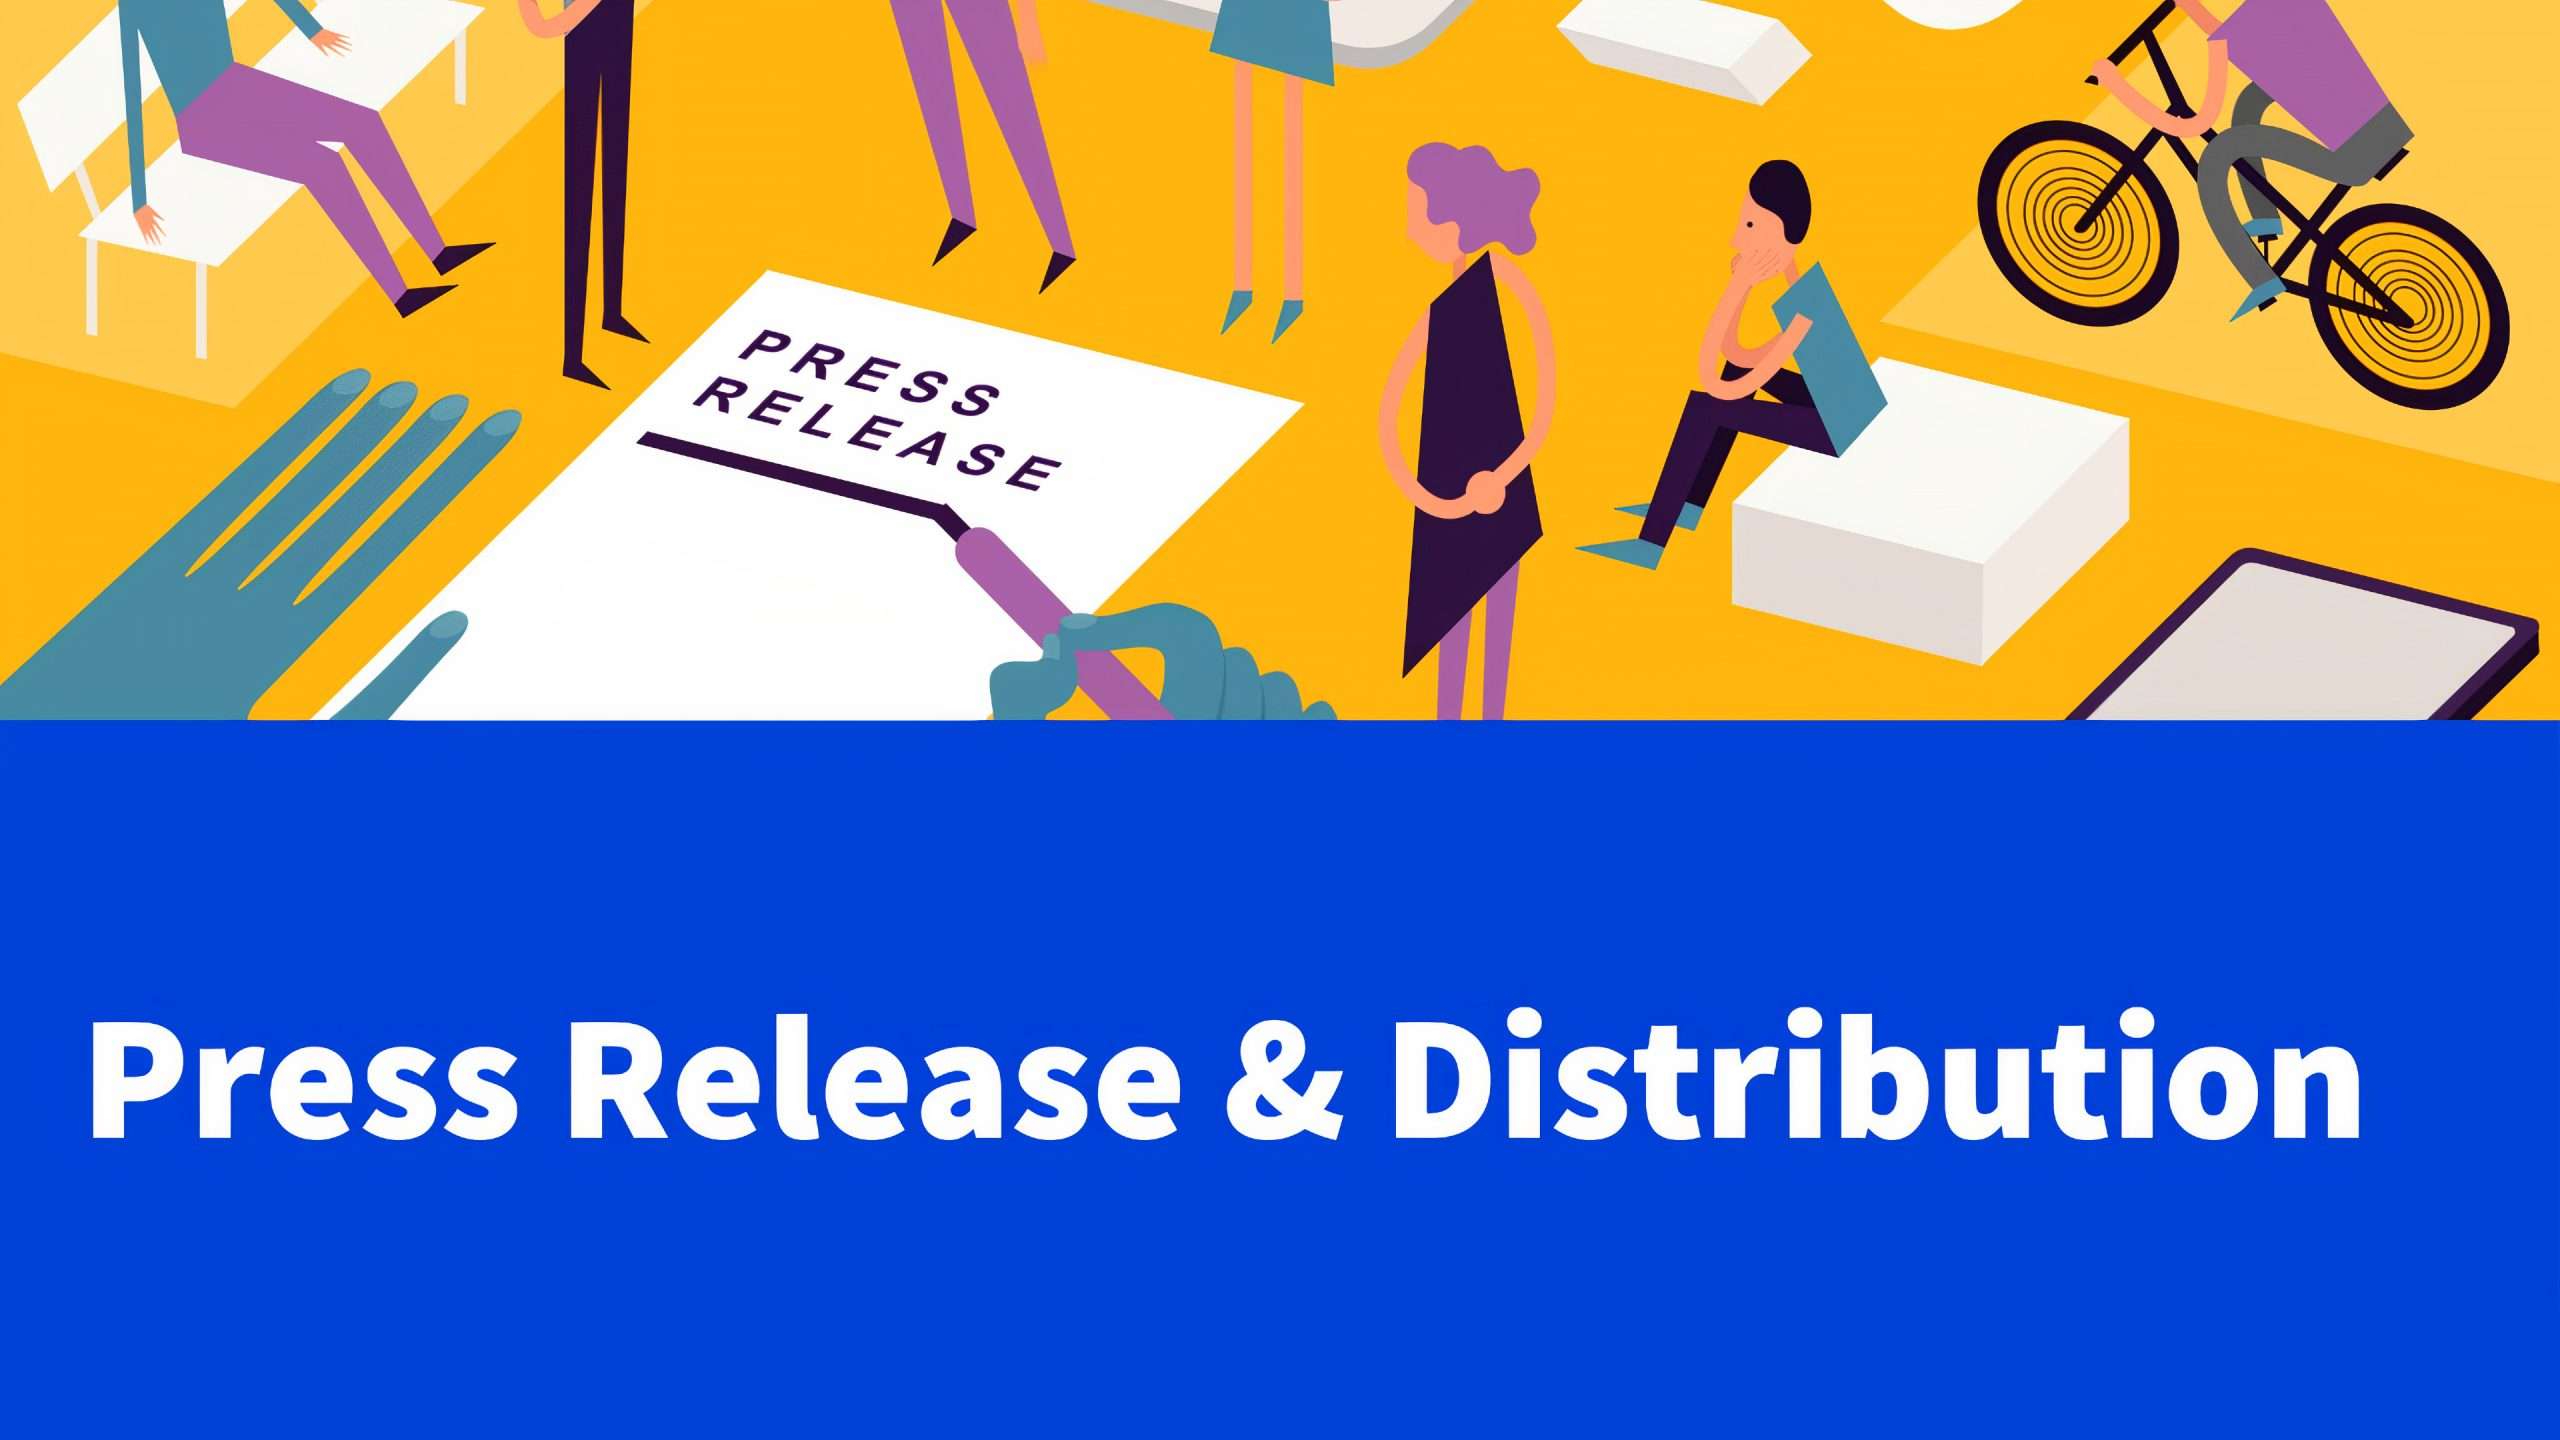 Press Release & Distribution Services with c4n2